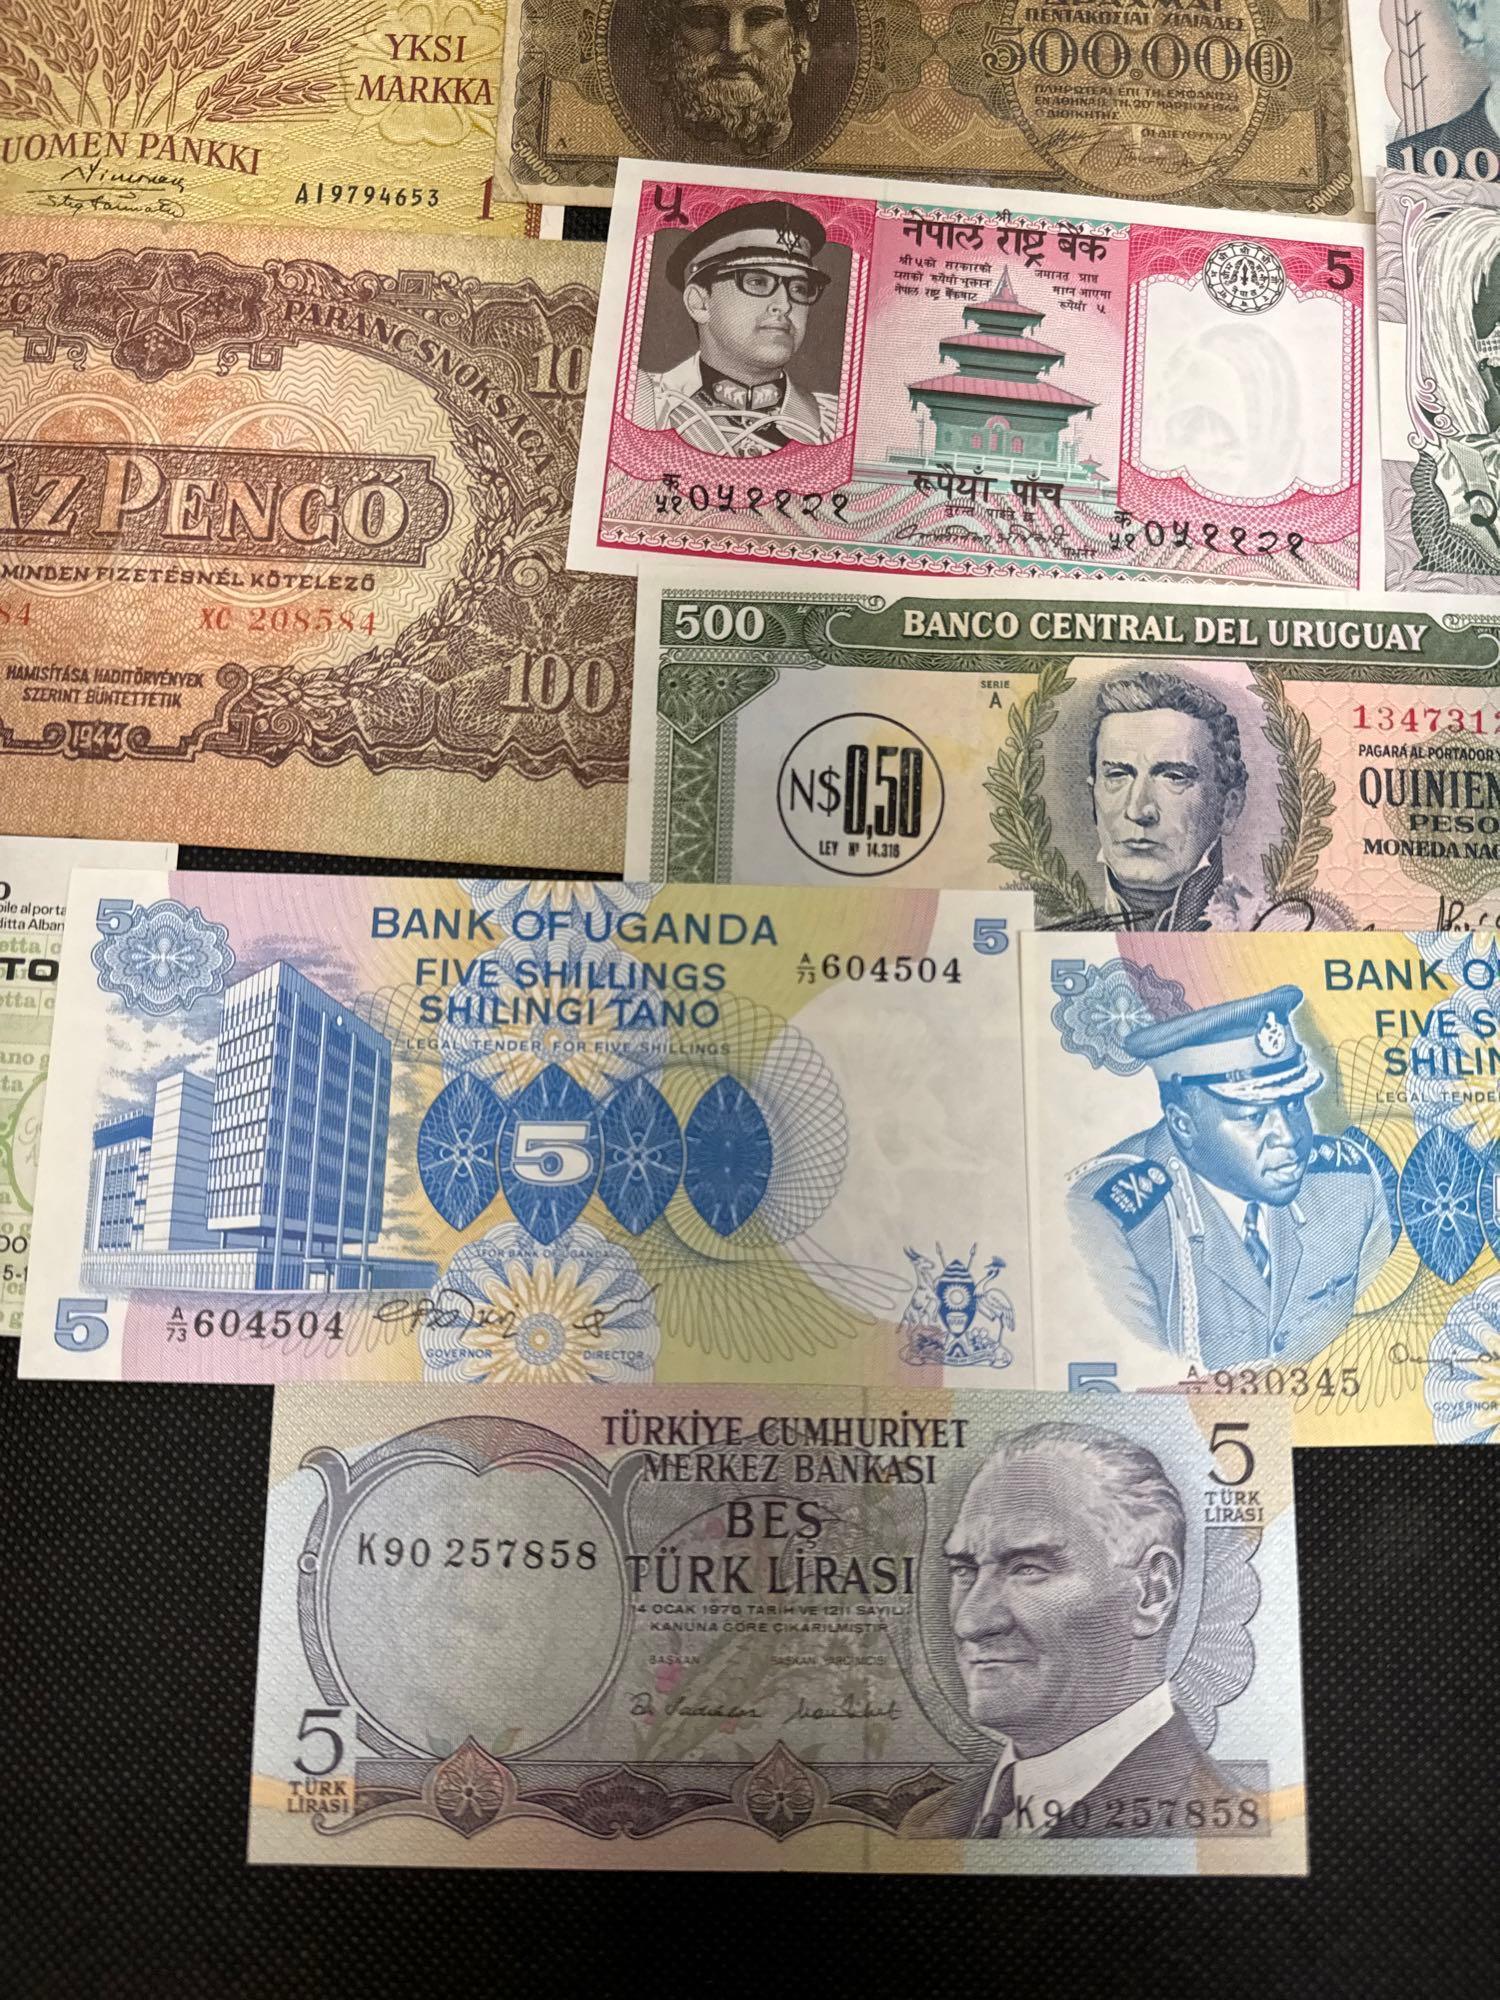 Foreign Banknotes Turkey, Italy, Nepal, Iceland, and more